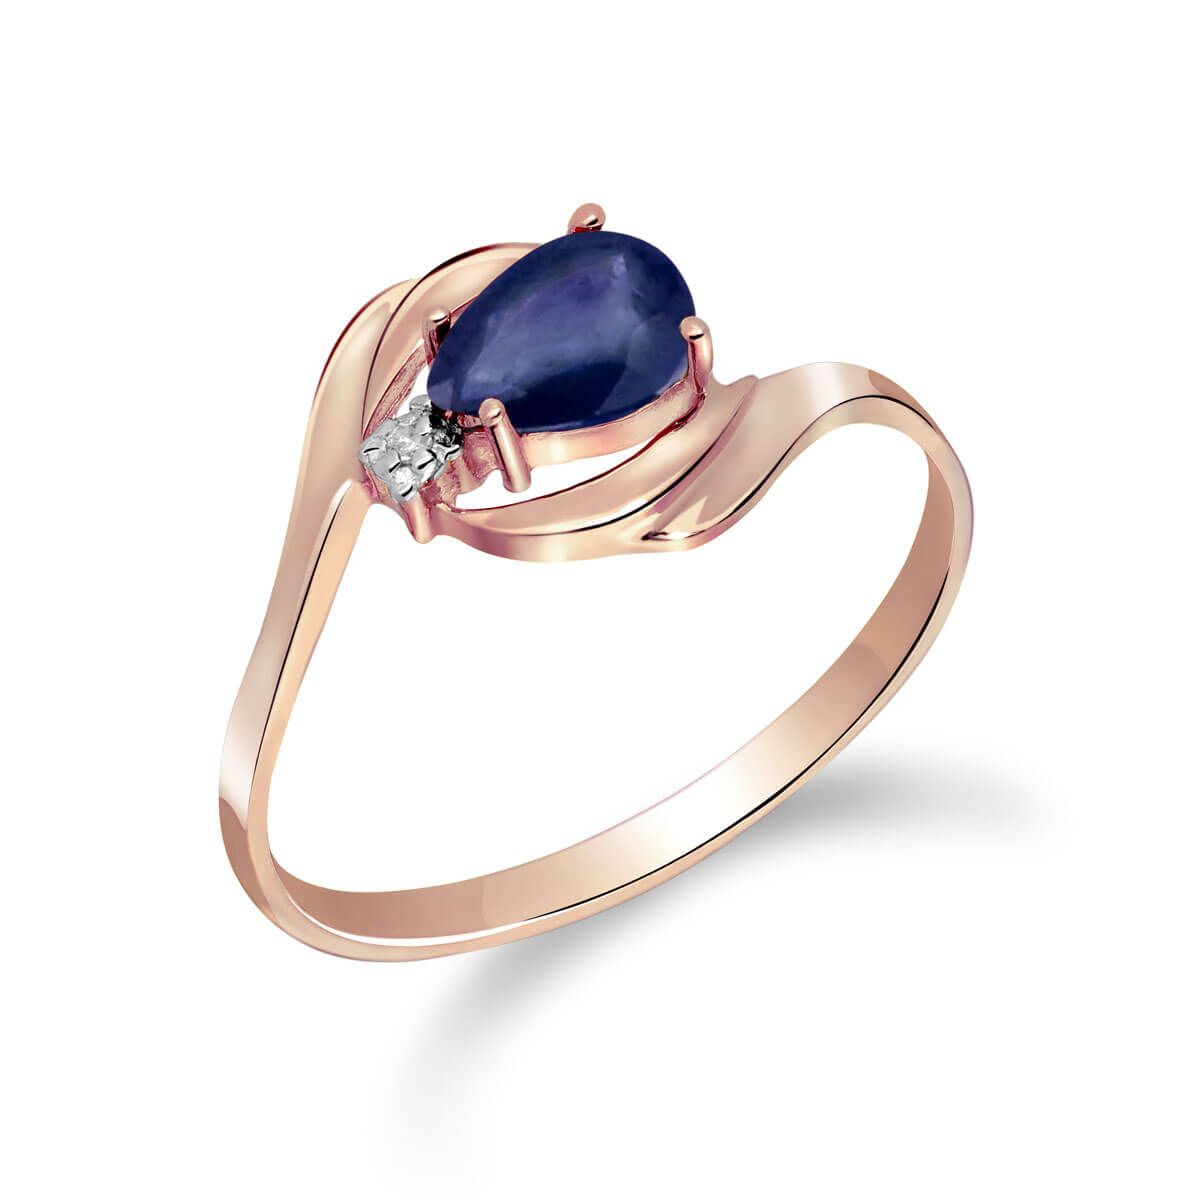 Sapphire & Diamond Flare Ring in 9ct Rose Gold